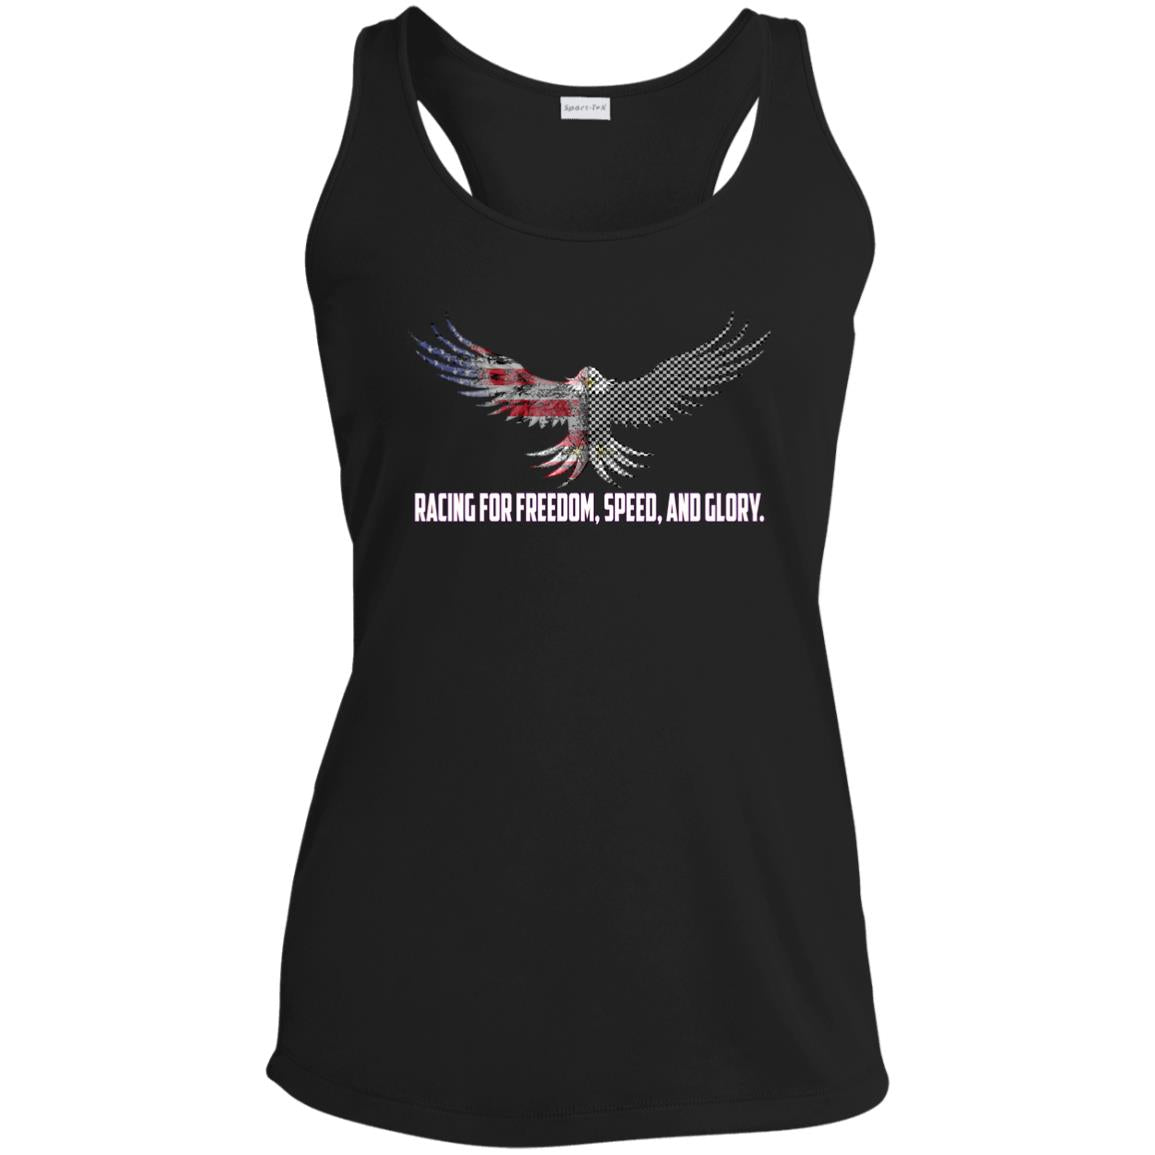 Racing For Freedom, Speed, And Glory Ladies' Performance Racerback Tank